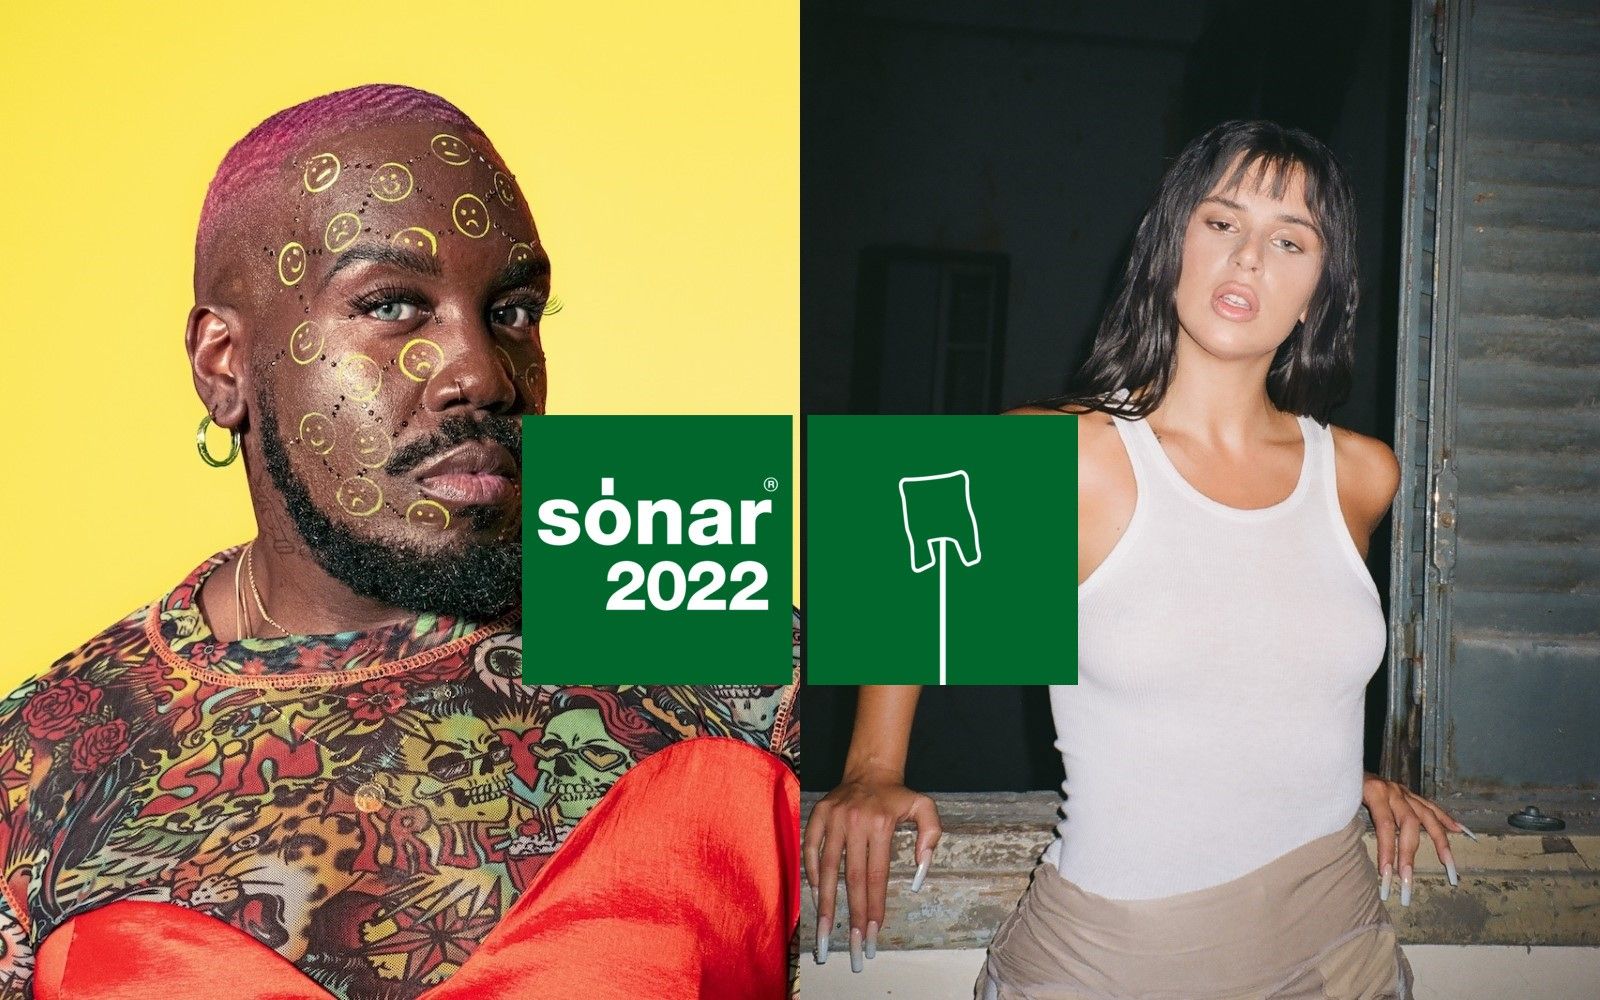 Sónar Barcelona 2022 line-up adds 27 new shows Get ready to dance from 16 to 18 June next year